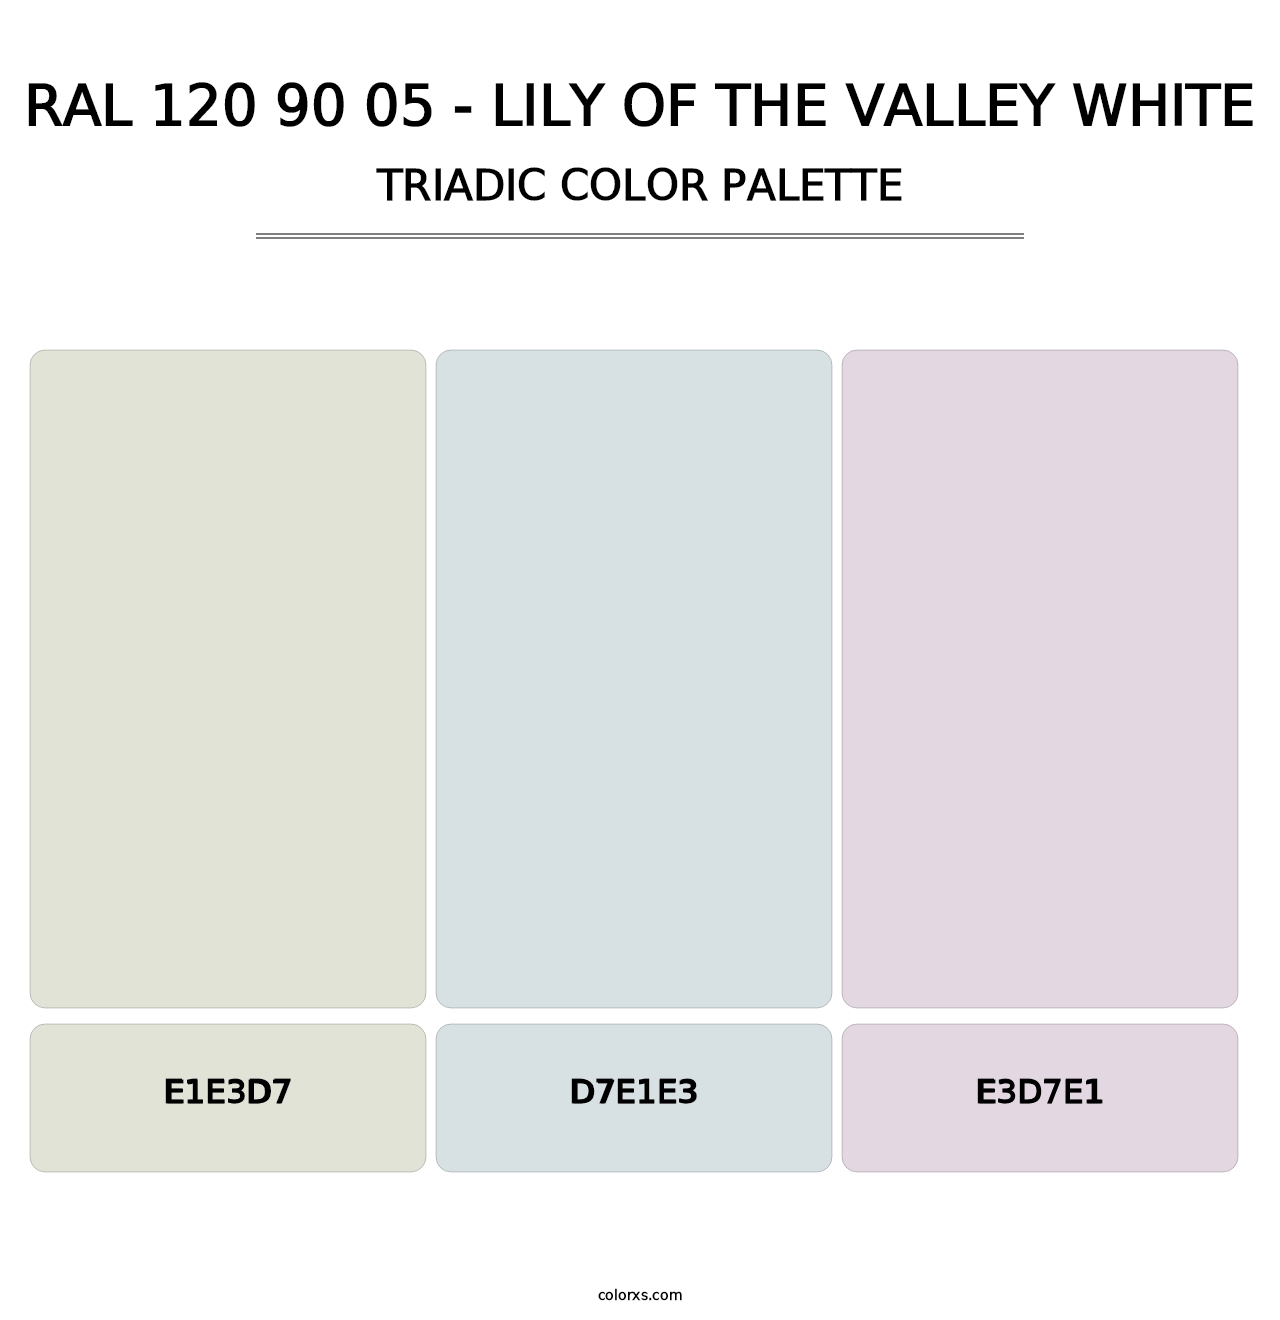 RAL 120 90 05 - Lily of the Valley White - Triadic Color Palette